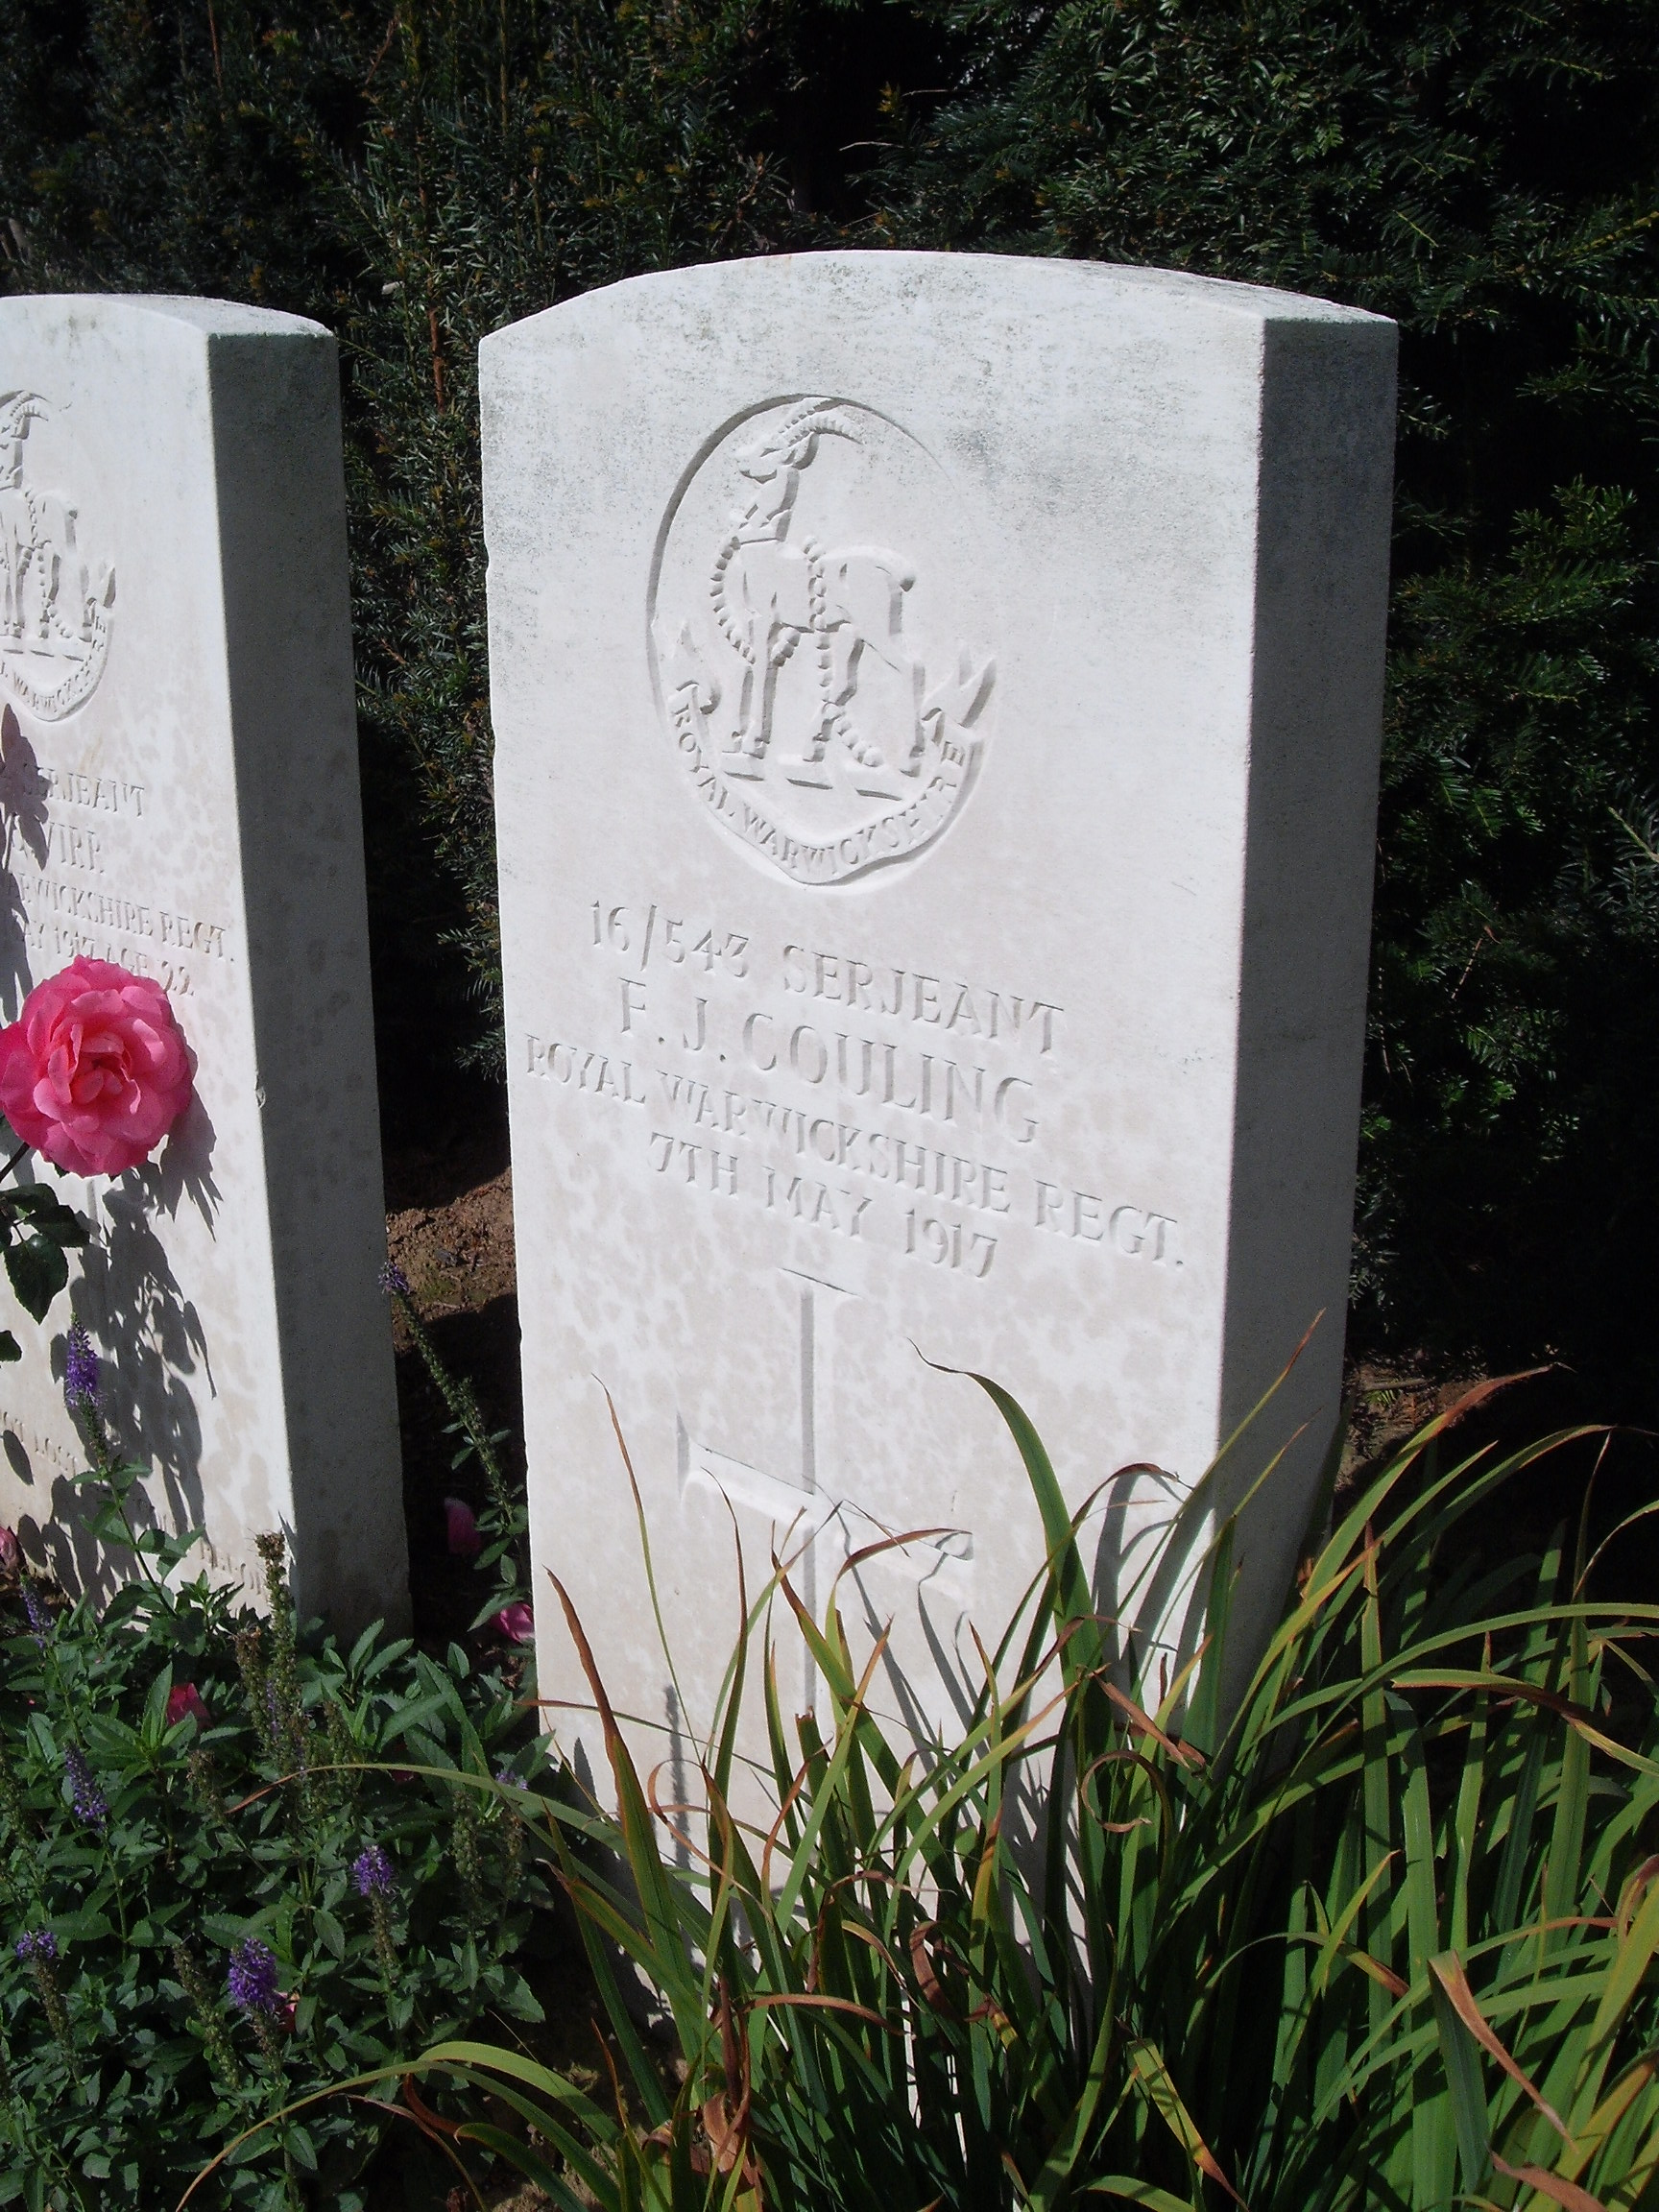 Frederick Couling's grave at Orchard Dump Cemetery, Arleux-en-Gohelle